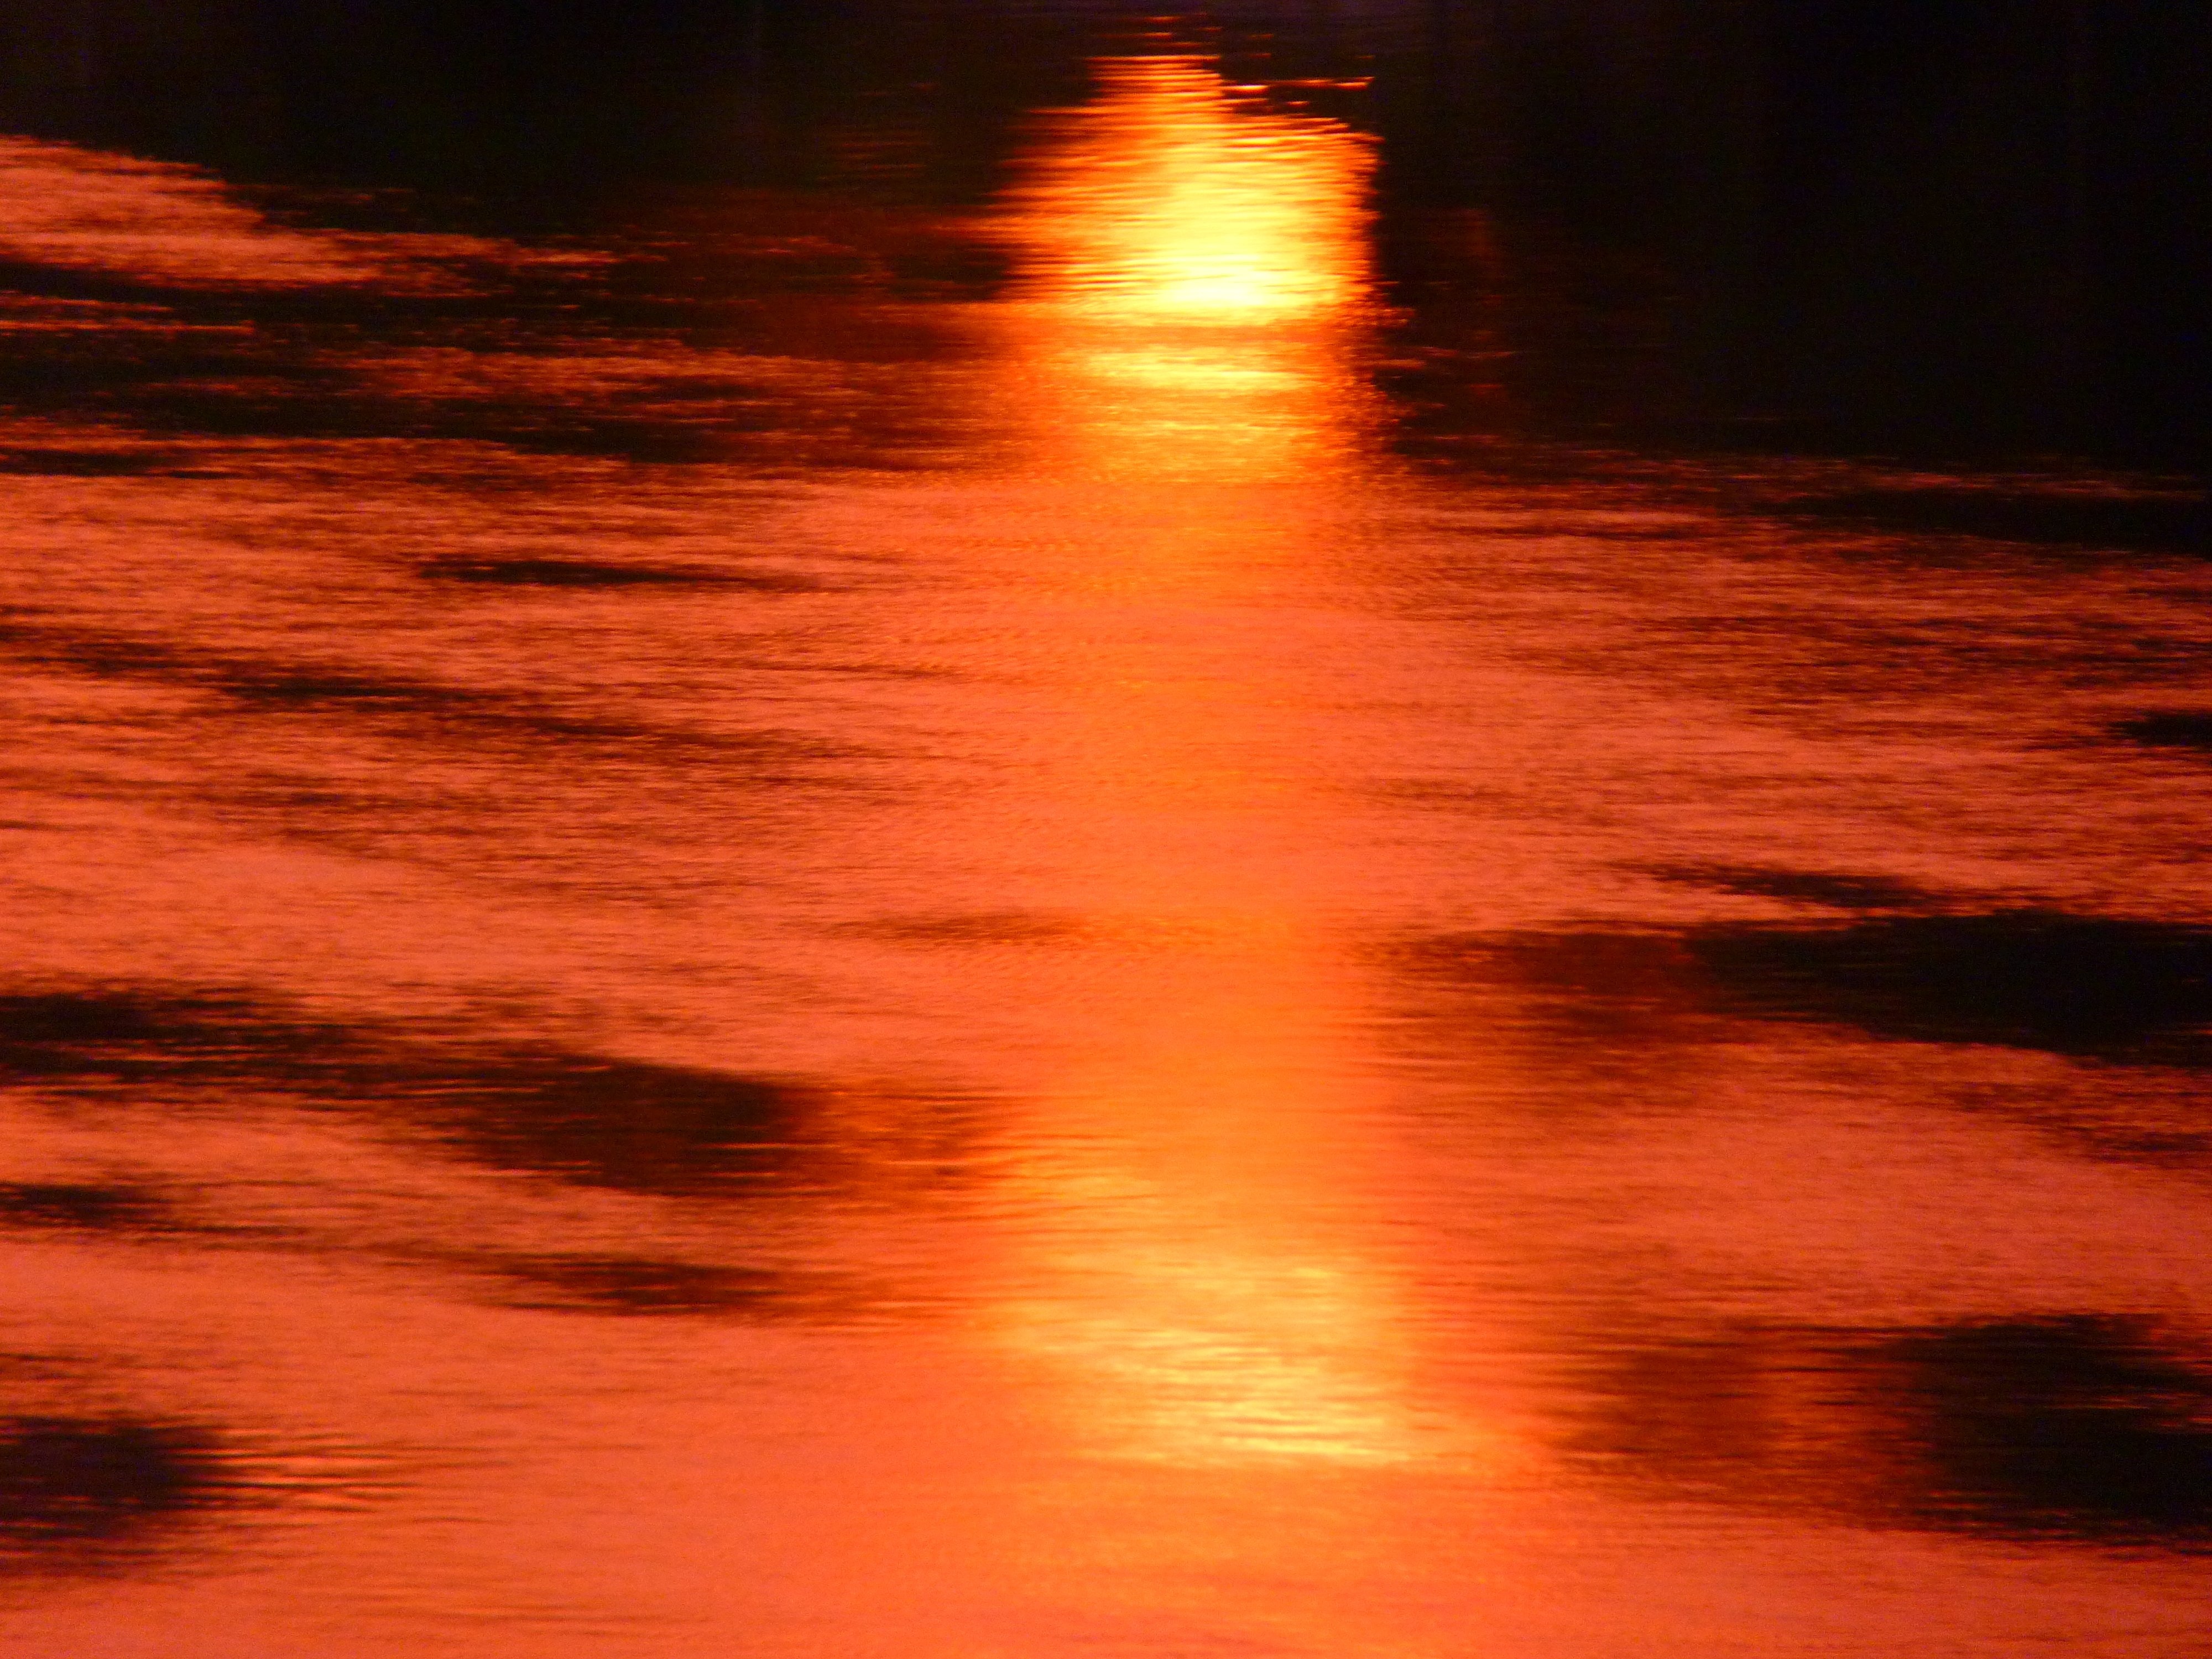 sunset reflection on the ocean